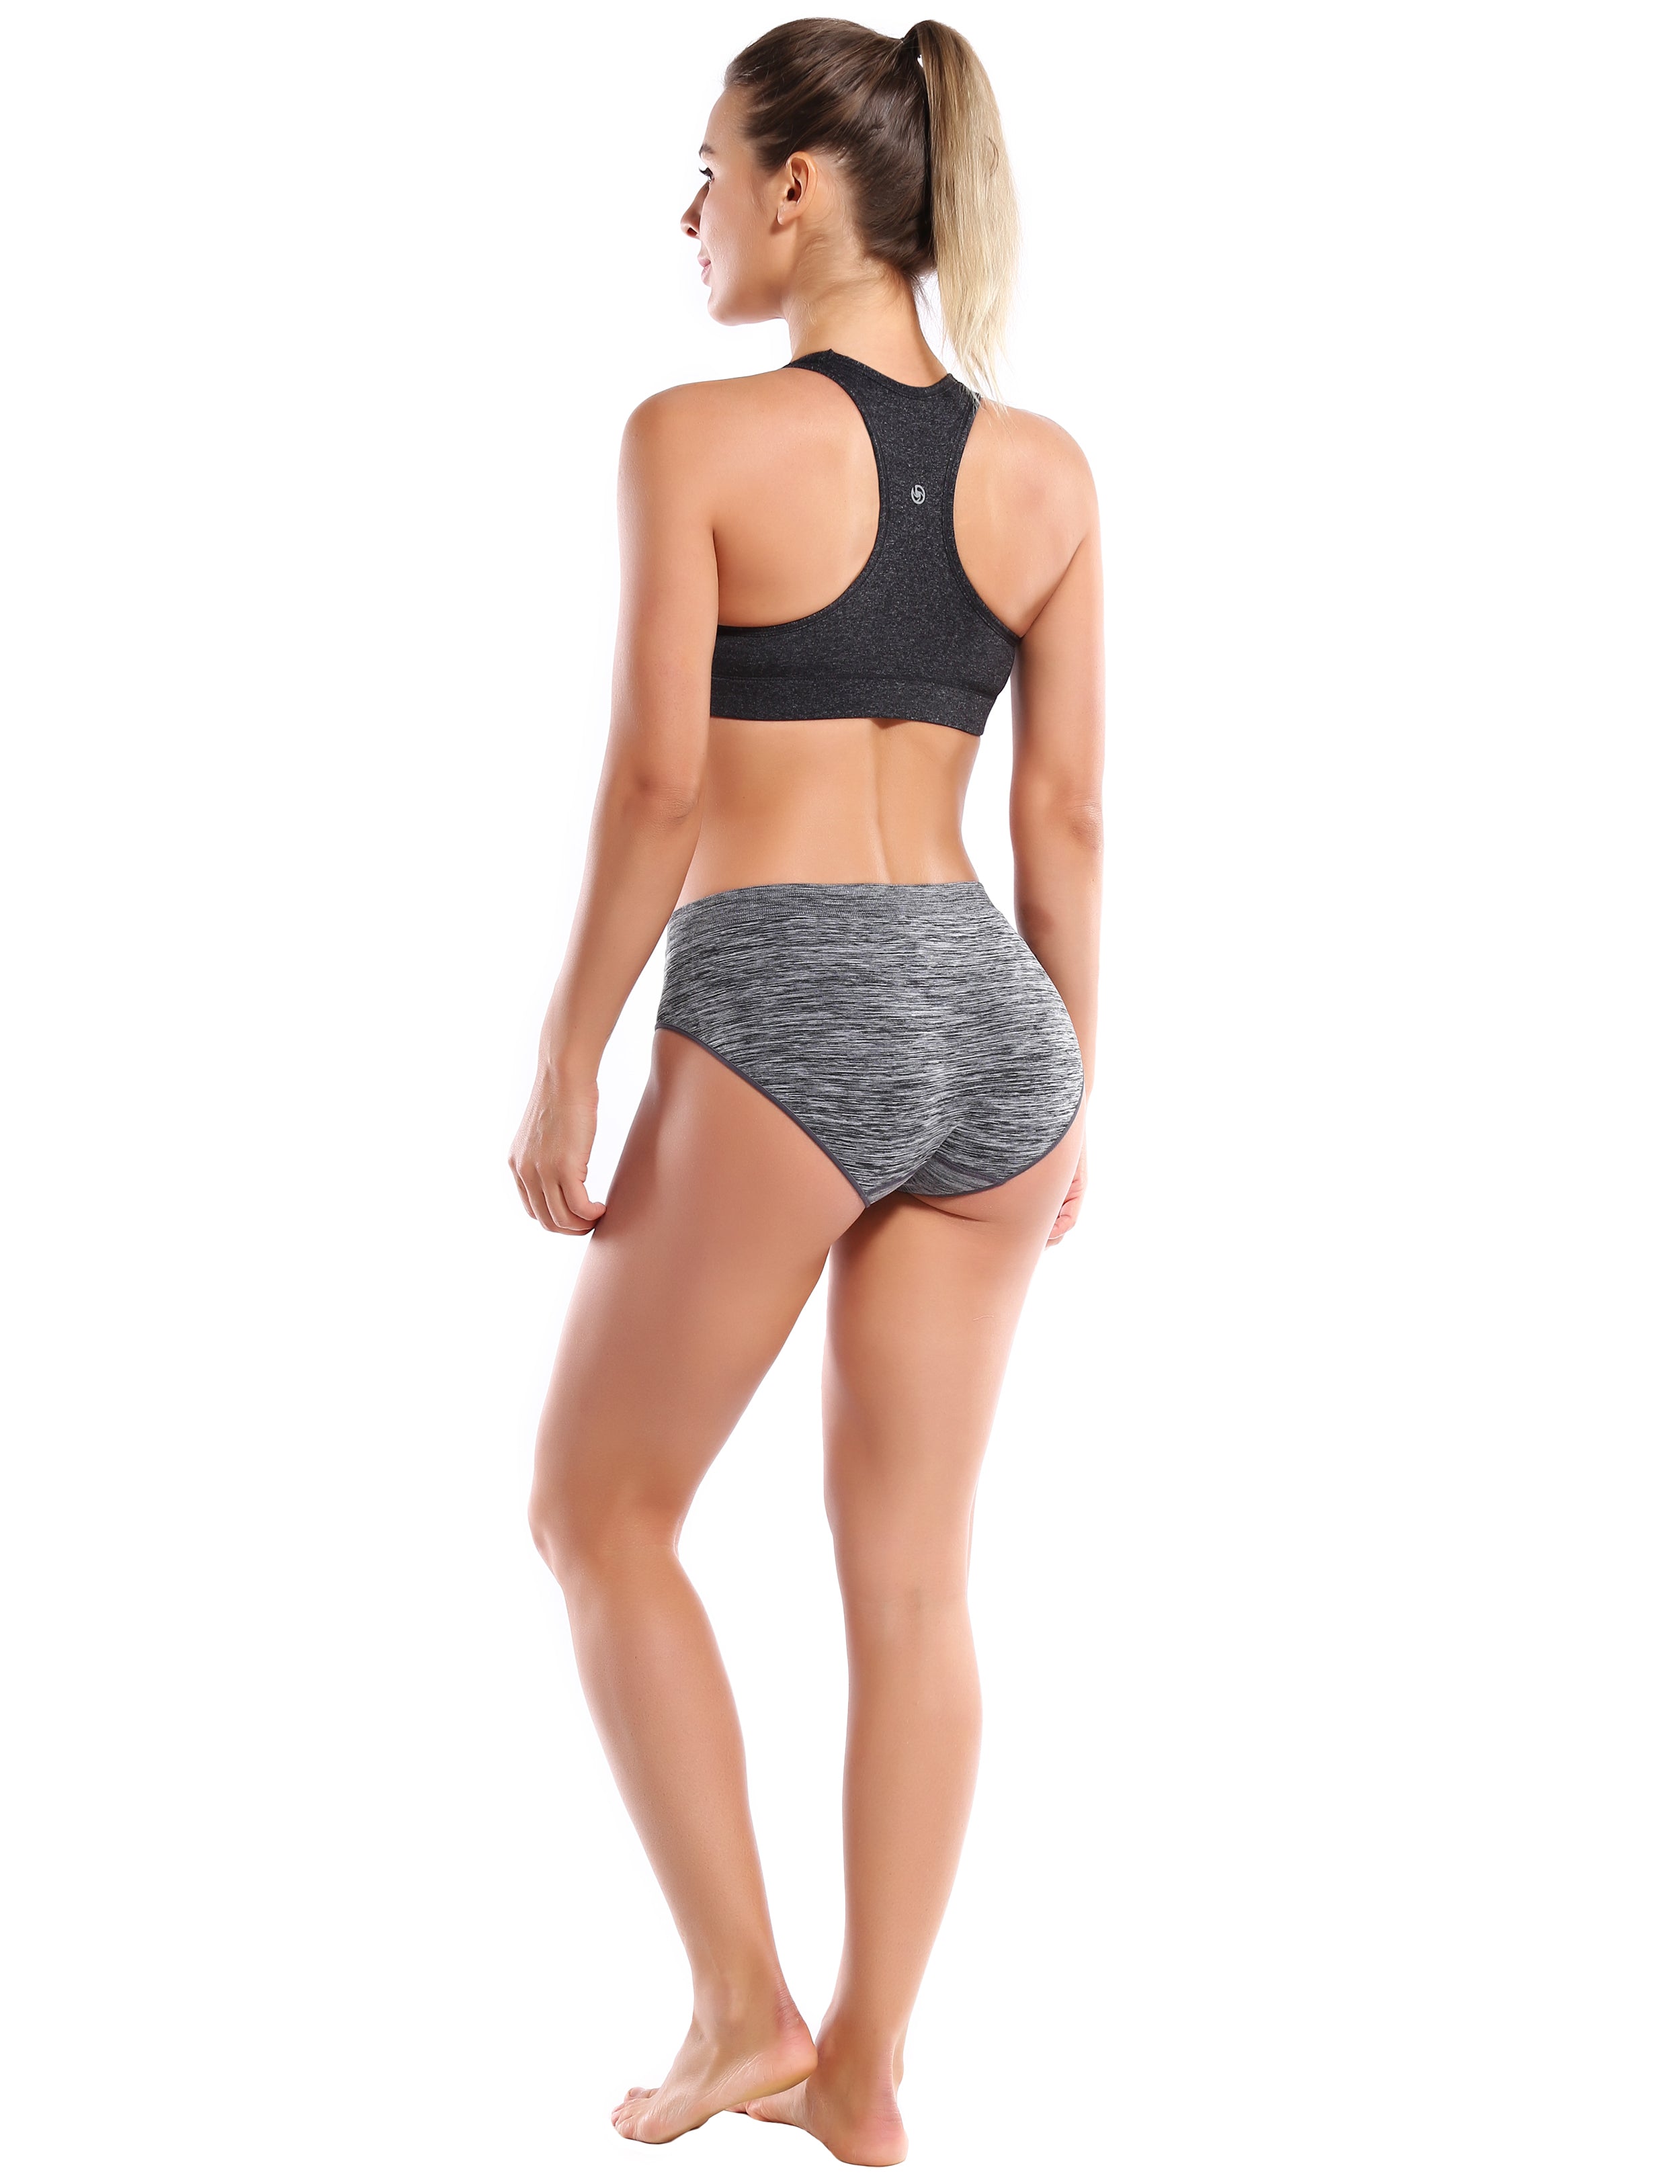 Seamless Sport Bikini Panties heathercharcoal Sleek, smooth and streamlined: designed in our extra-soft knit material, this seamless thong embraces everyday comfort. Here with an allover heathered effect. Weave threads one by one High elasticity Softest-ever fabric Unsealed Comfortable No back coverage Machine wash.